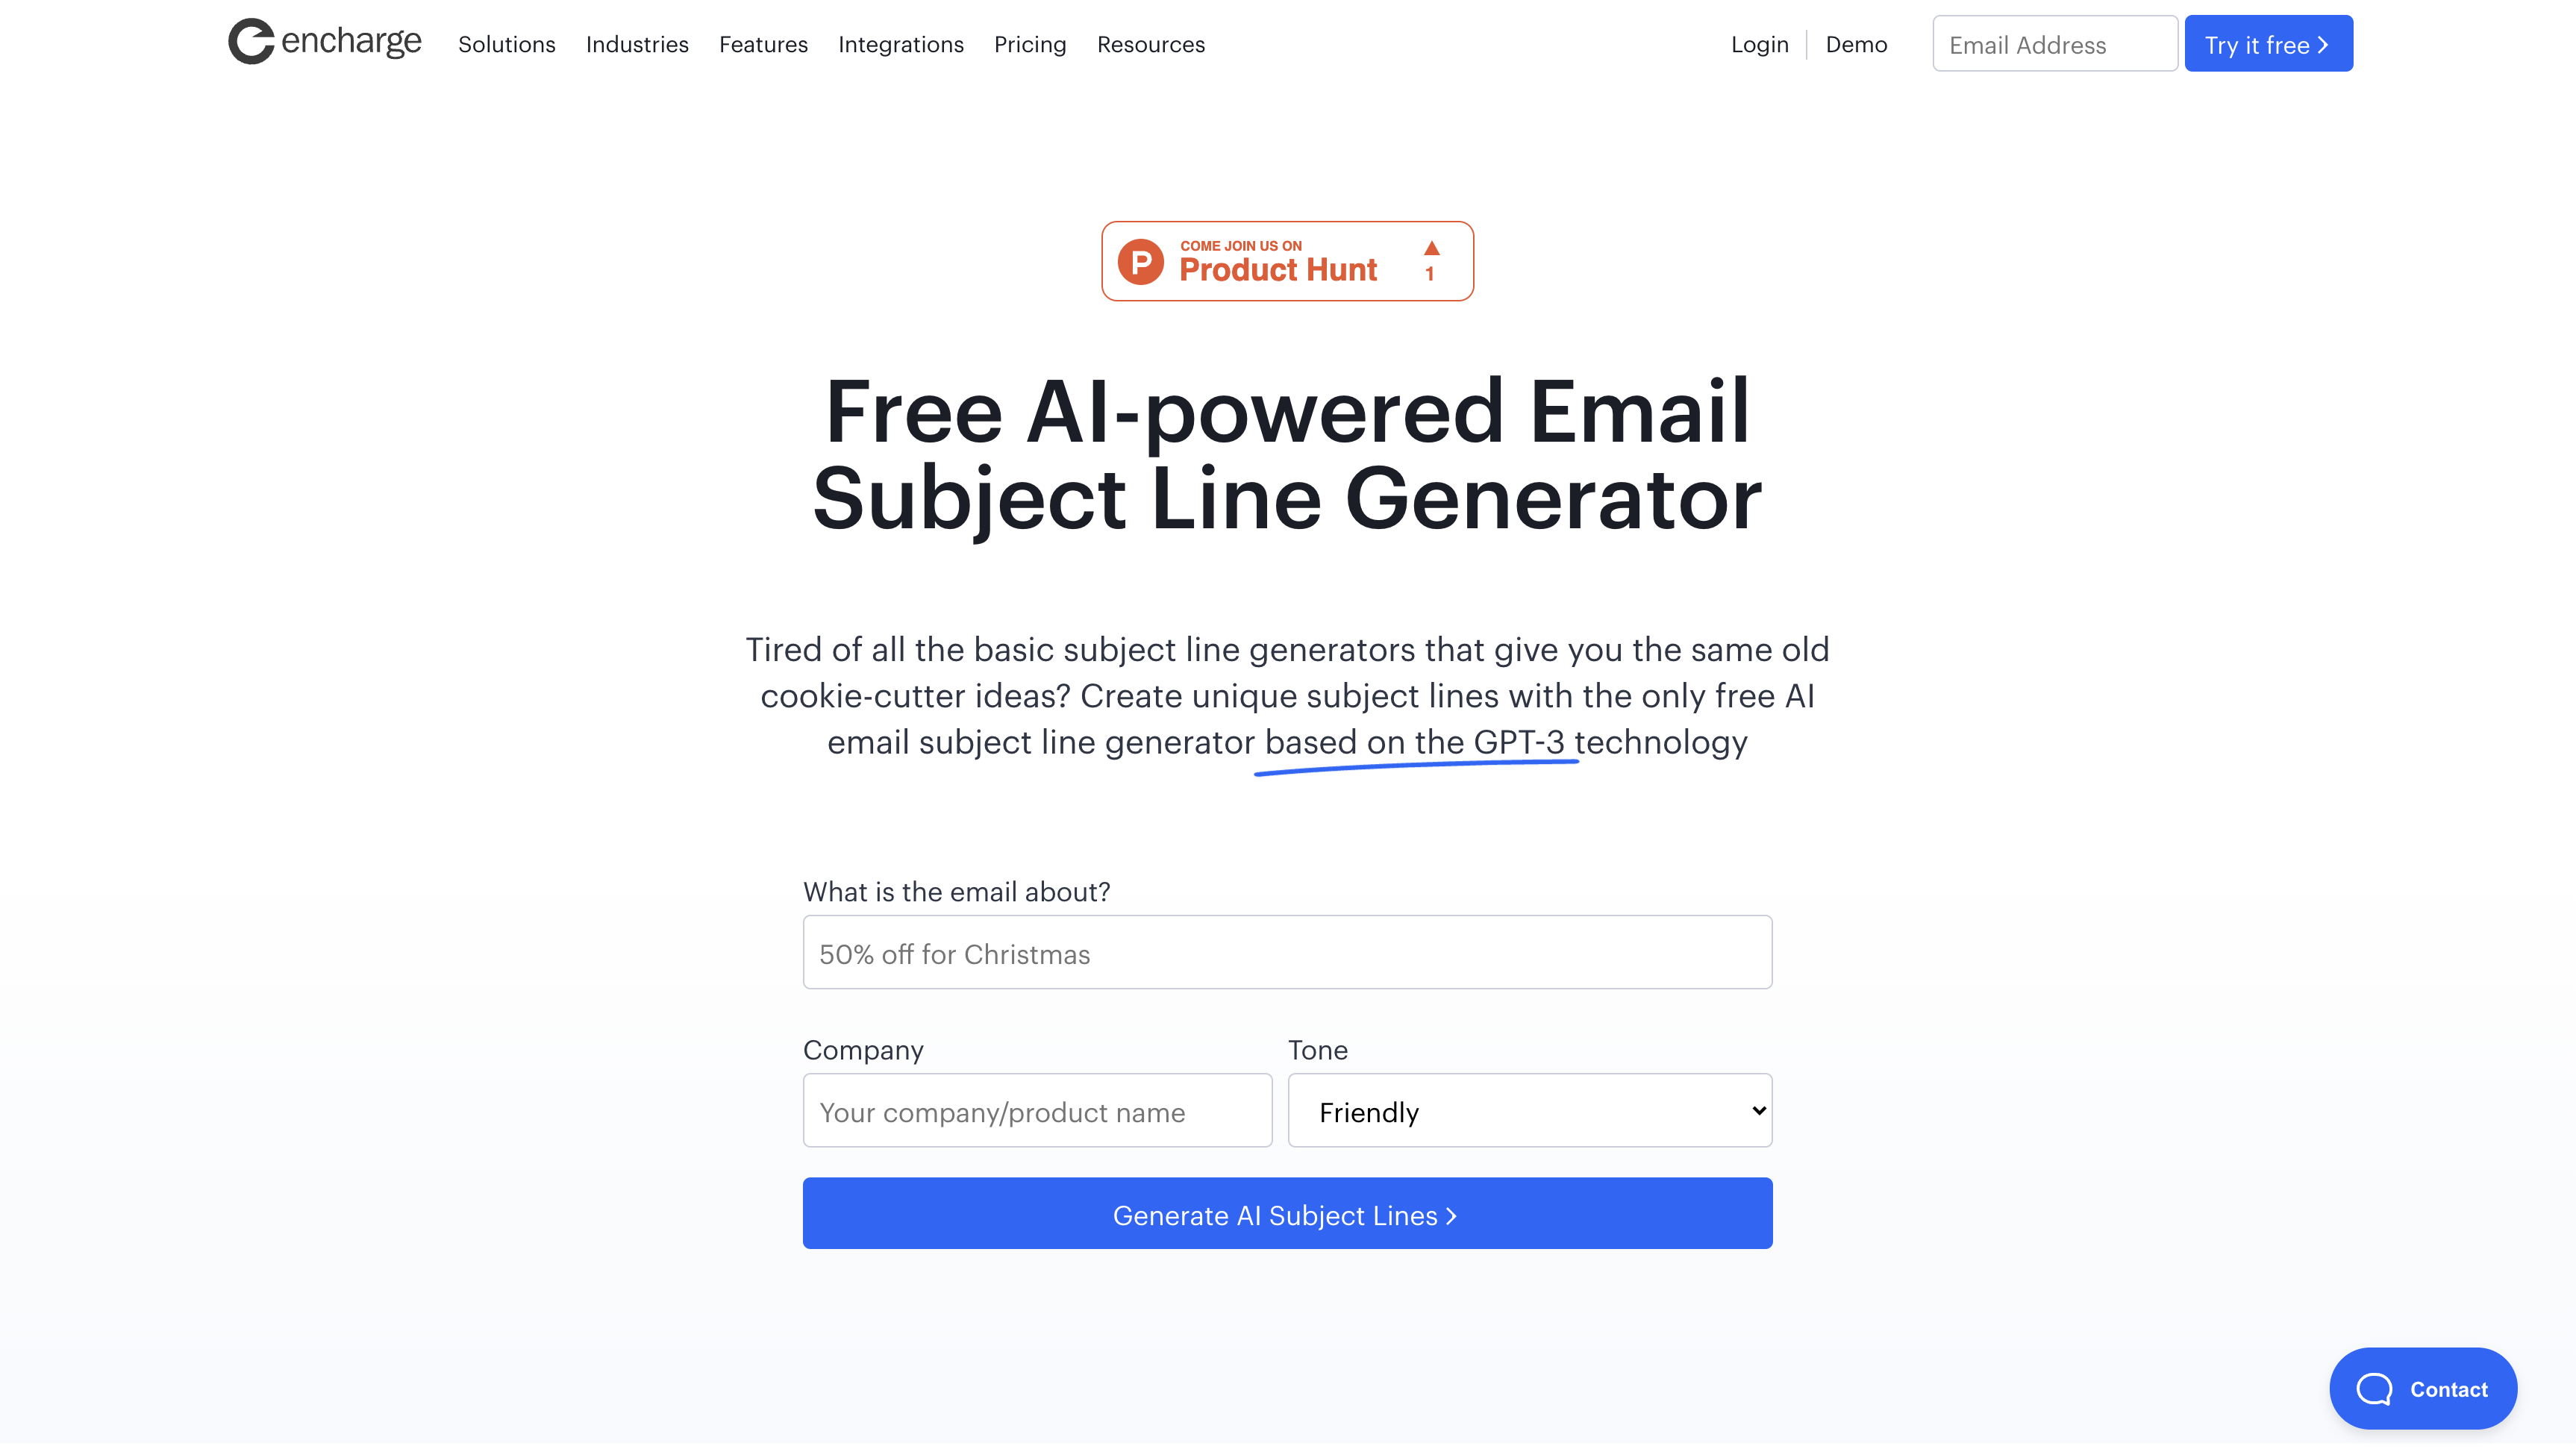 Free AI Email Subject Line Generator by Encharge - скриншот 2